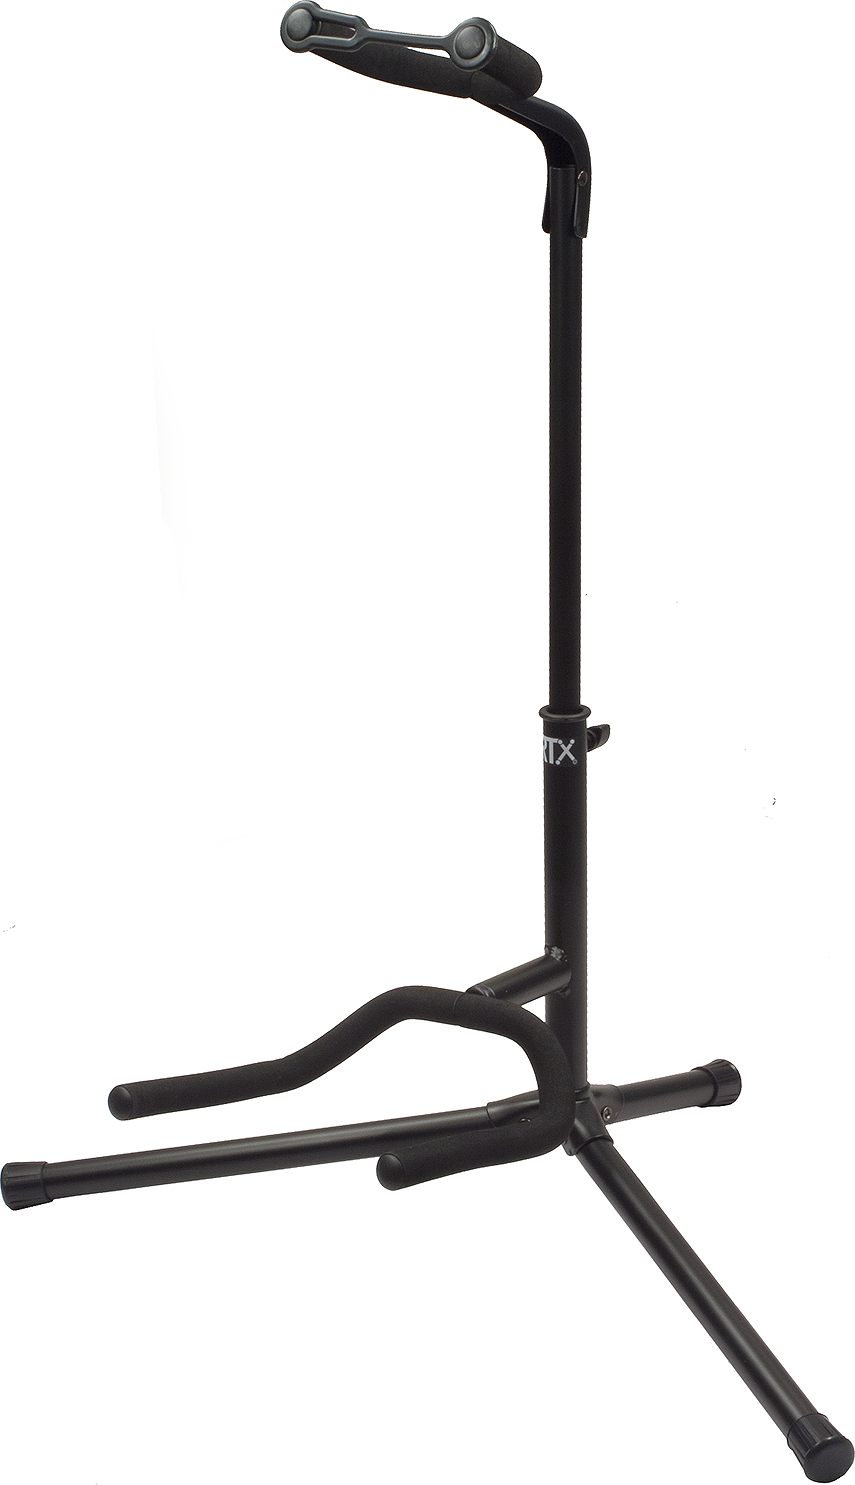 Rtx G1nx Stand Guitare Universel TÊte Pliable - Noir - Stand & Support Guitare & Basse - Main picture